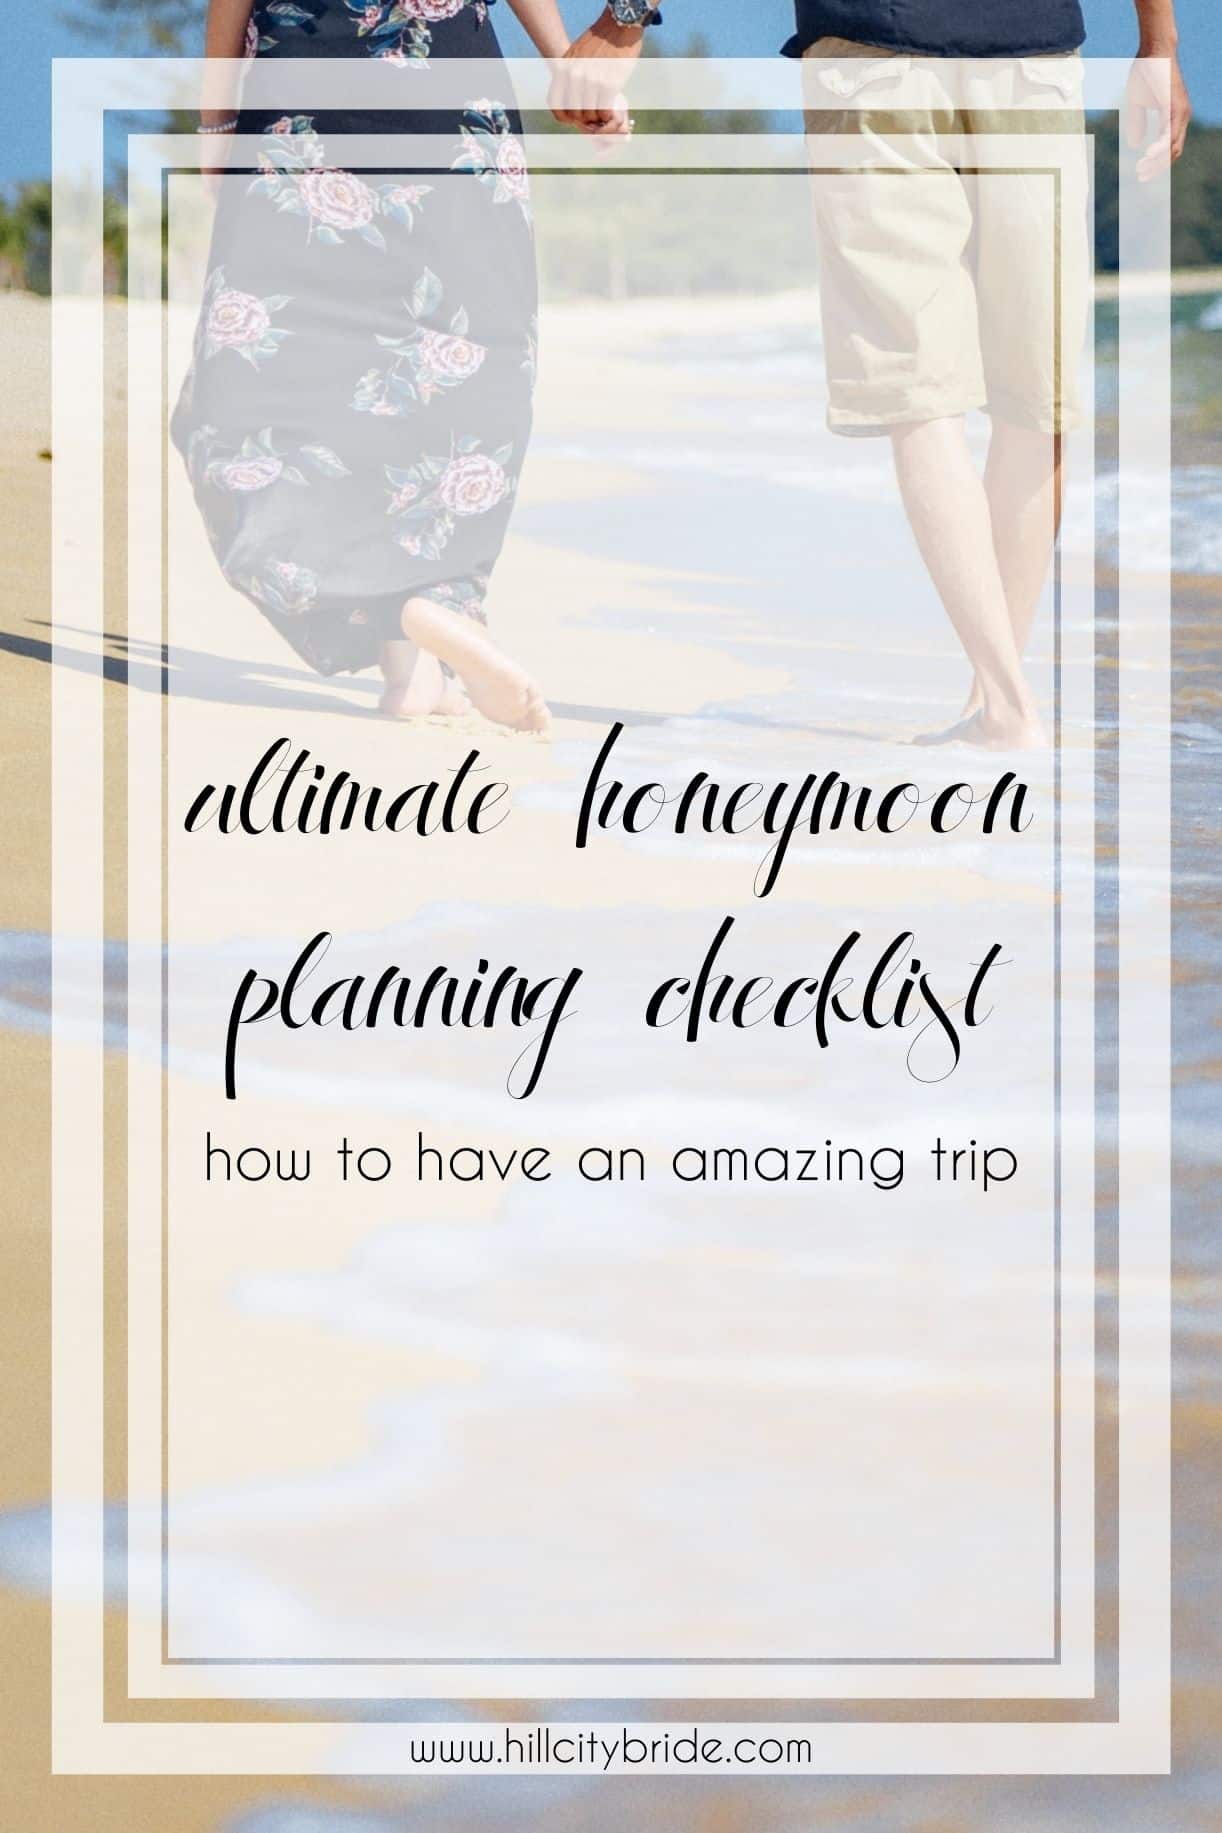 Ultimate Honeymoon Planning Checklist - How to Have an Amazing Trip